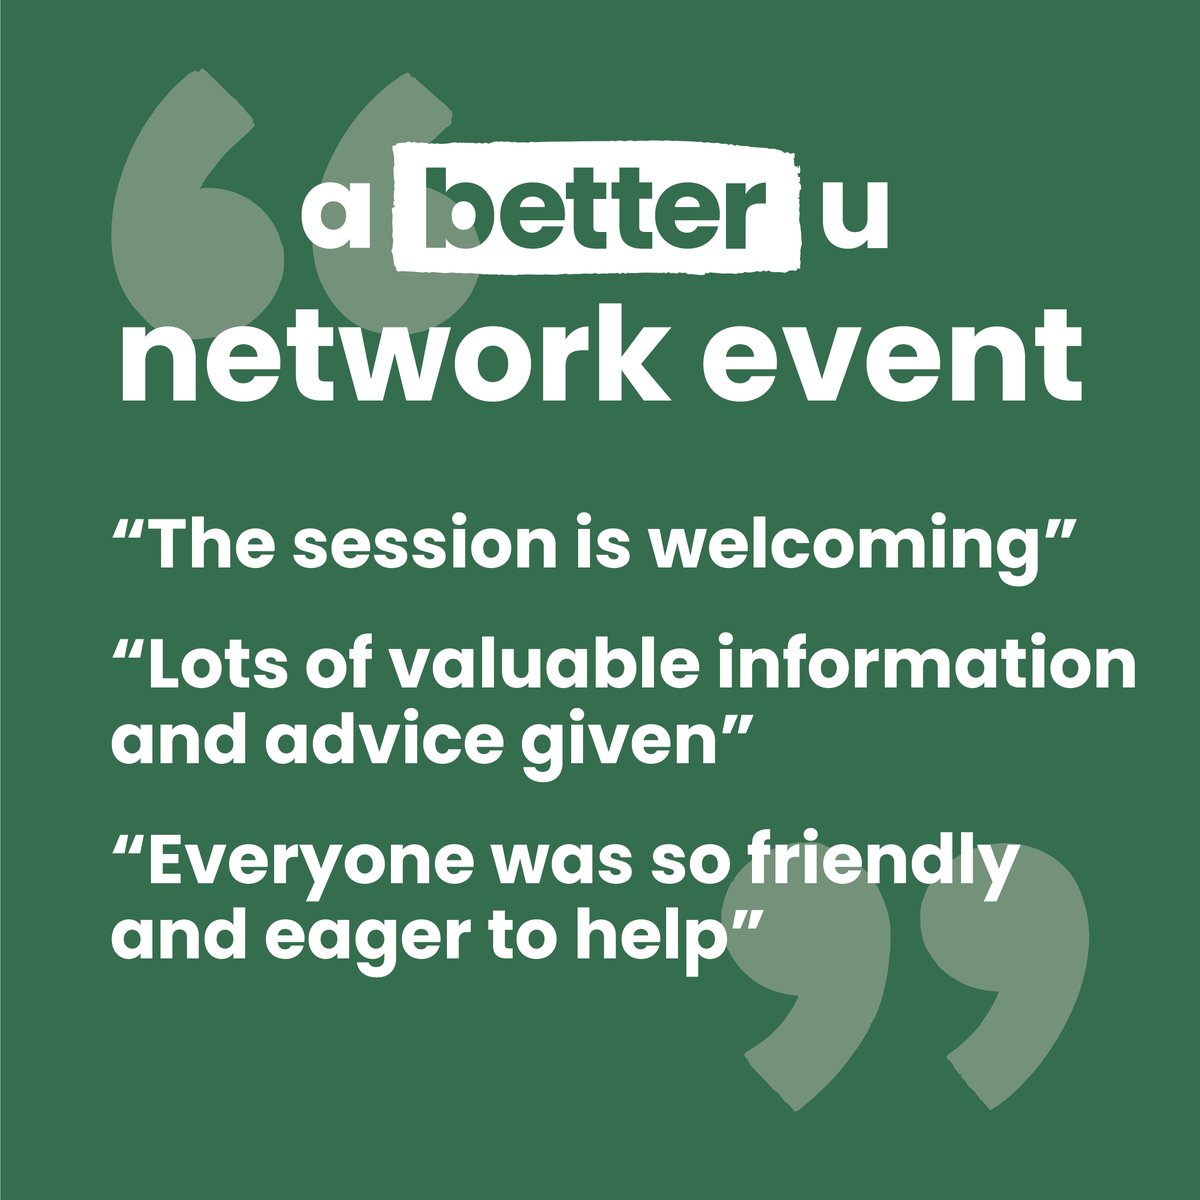 Come along to our next a better u information drop-in session tomorrow (Monday 8 April) 10am-12.30pm at Cleadon Park Library. This month's event is themed around World Health Day. Free refreshments are available